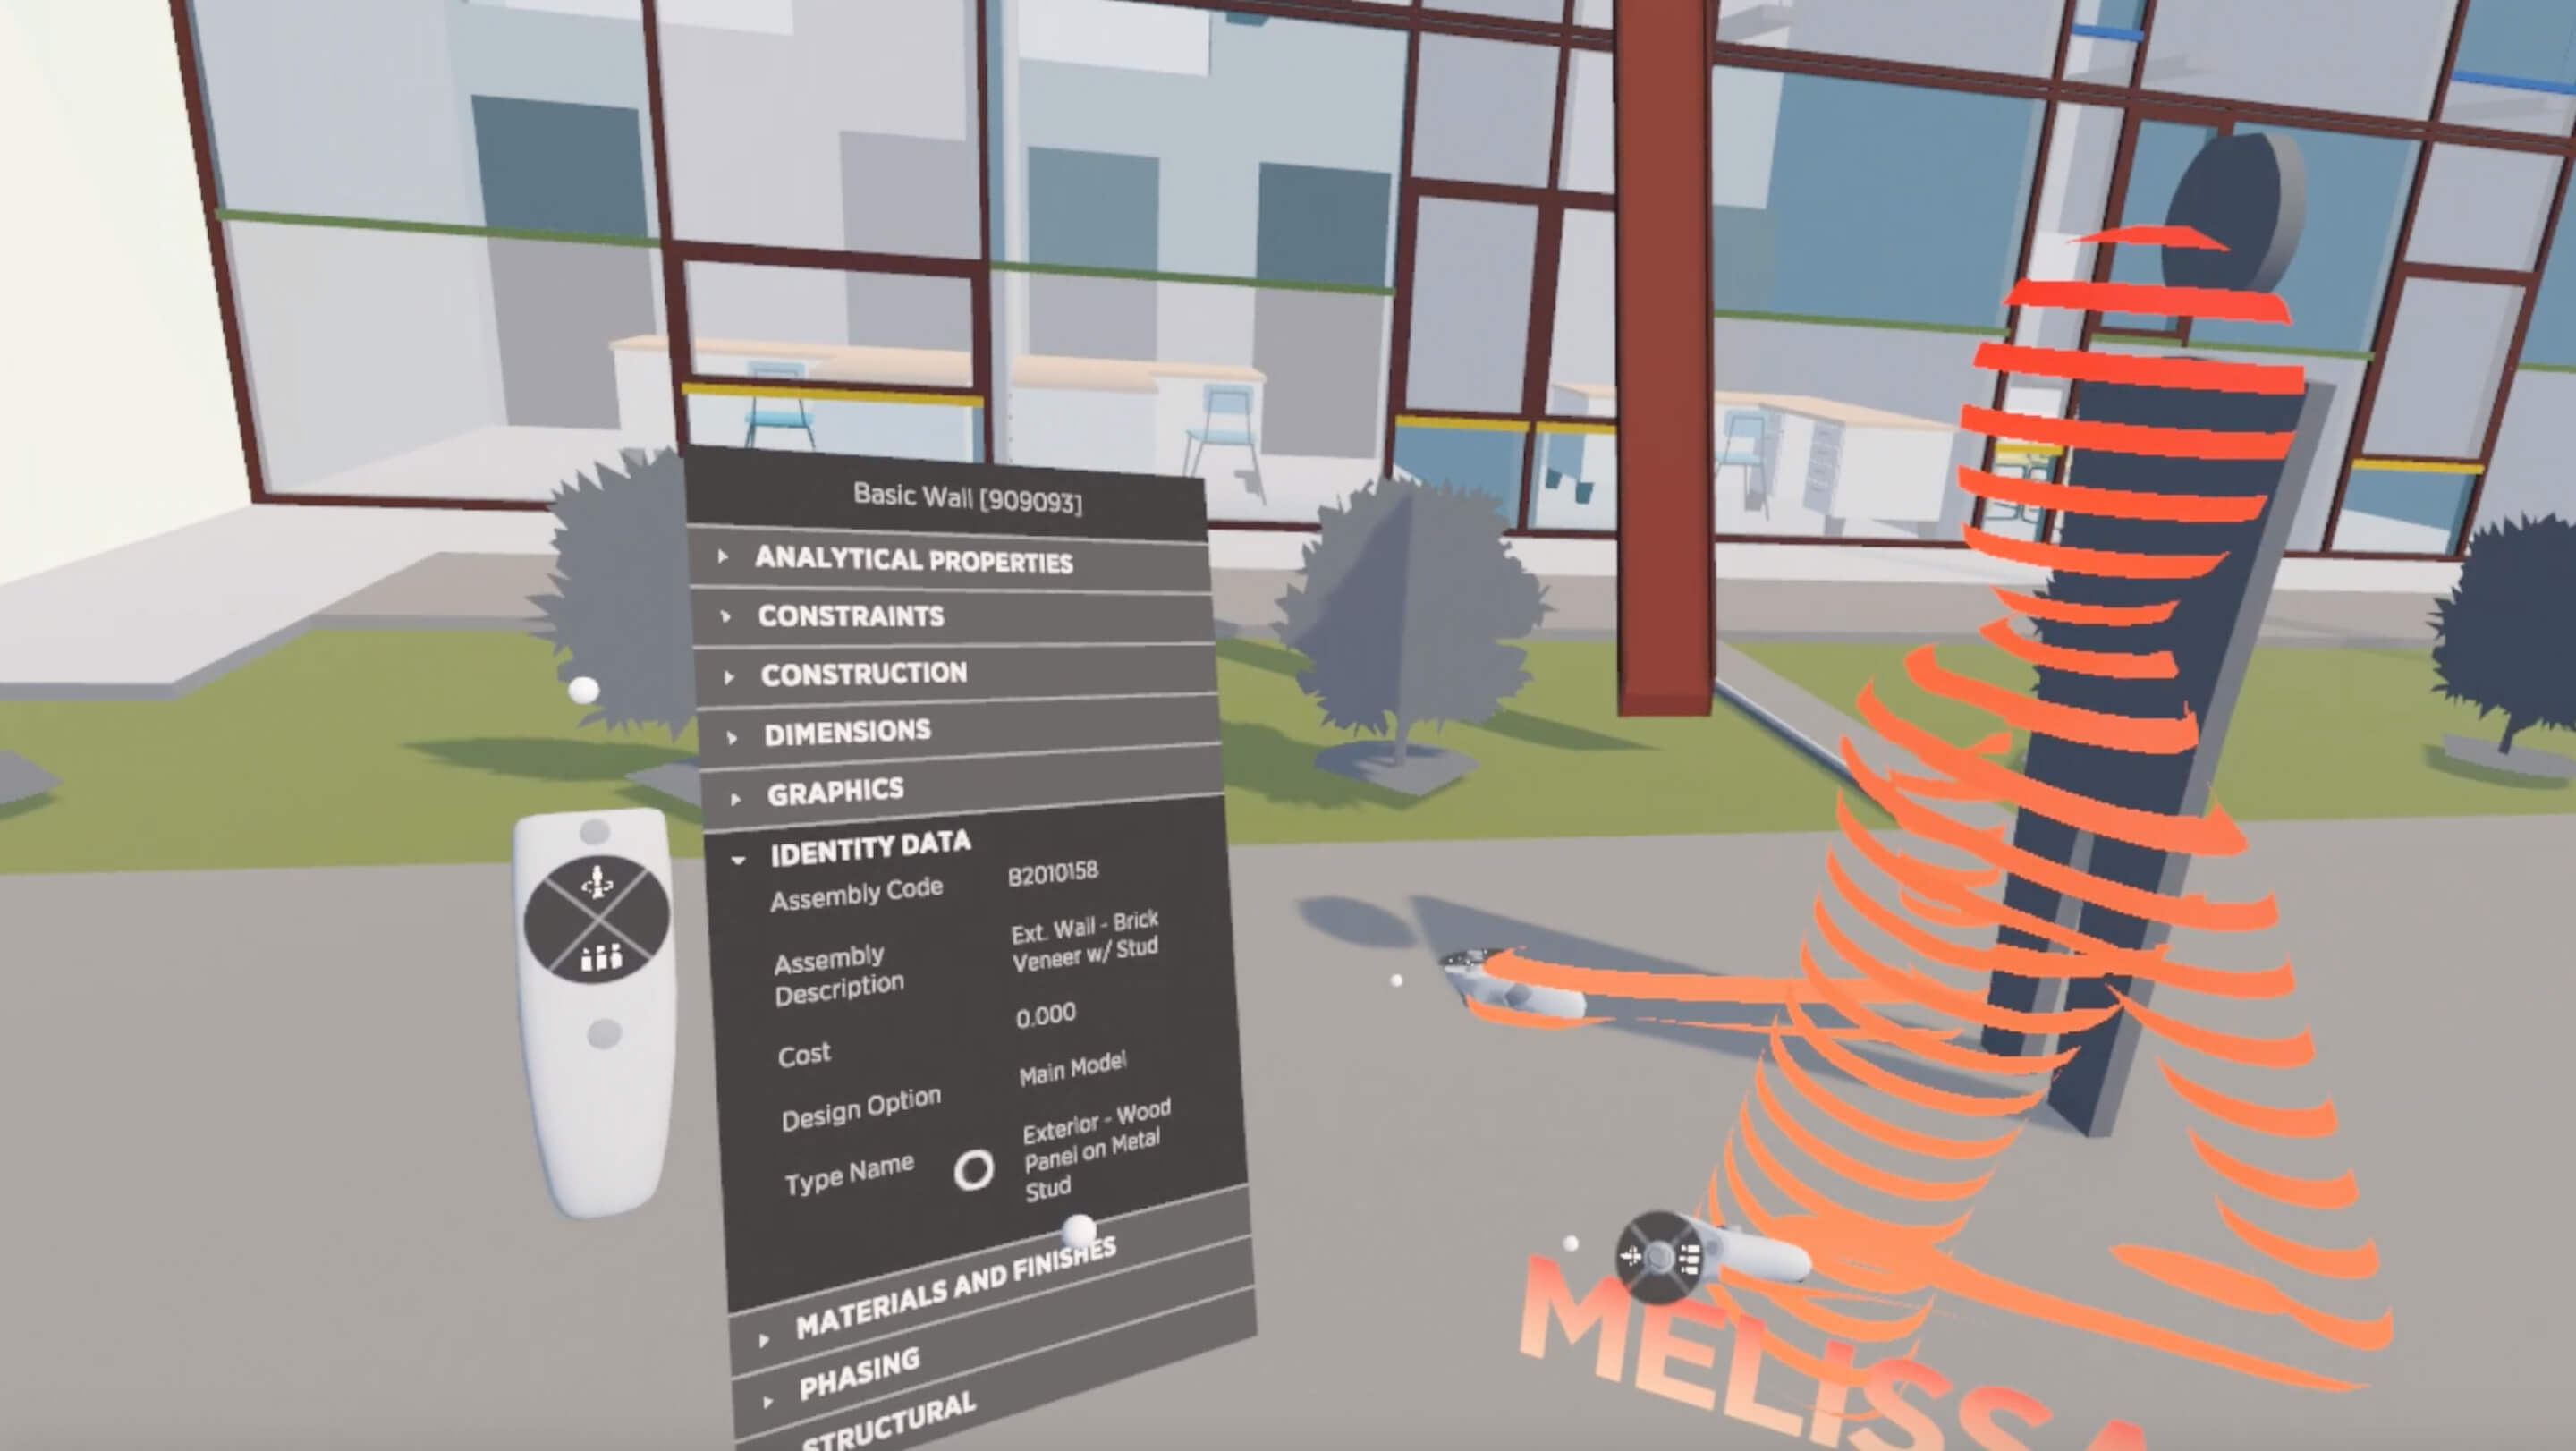 Mappe announcer møde Collaborative VR company The Wild buys IrisVR's Prospect